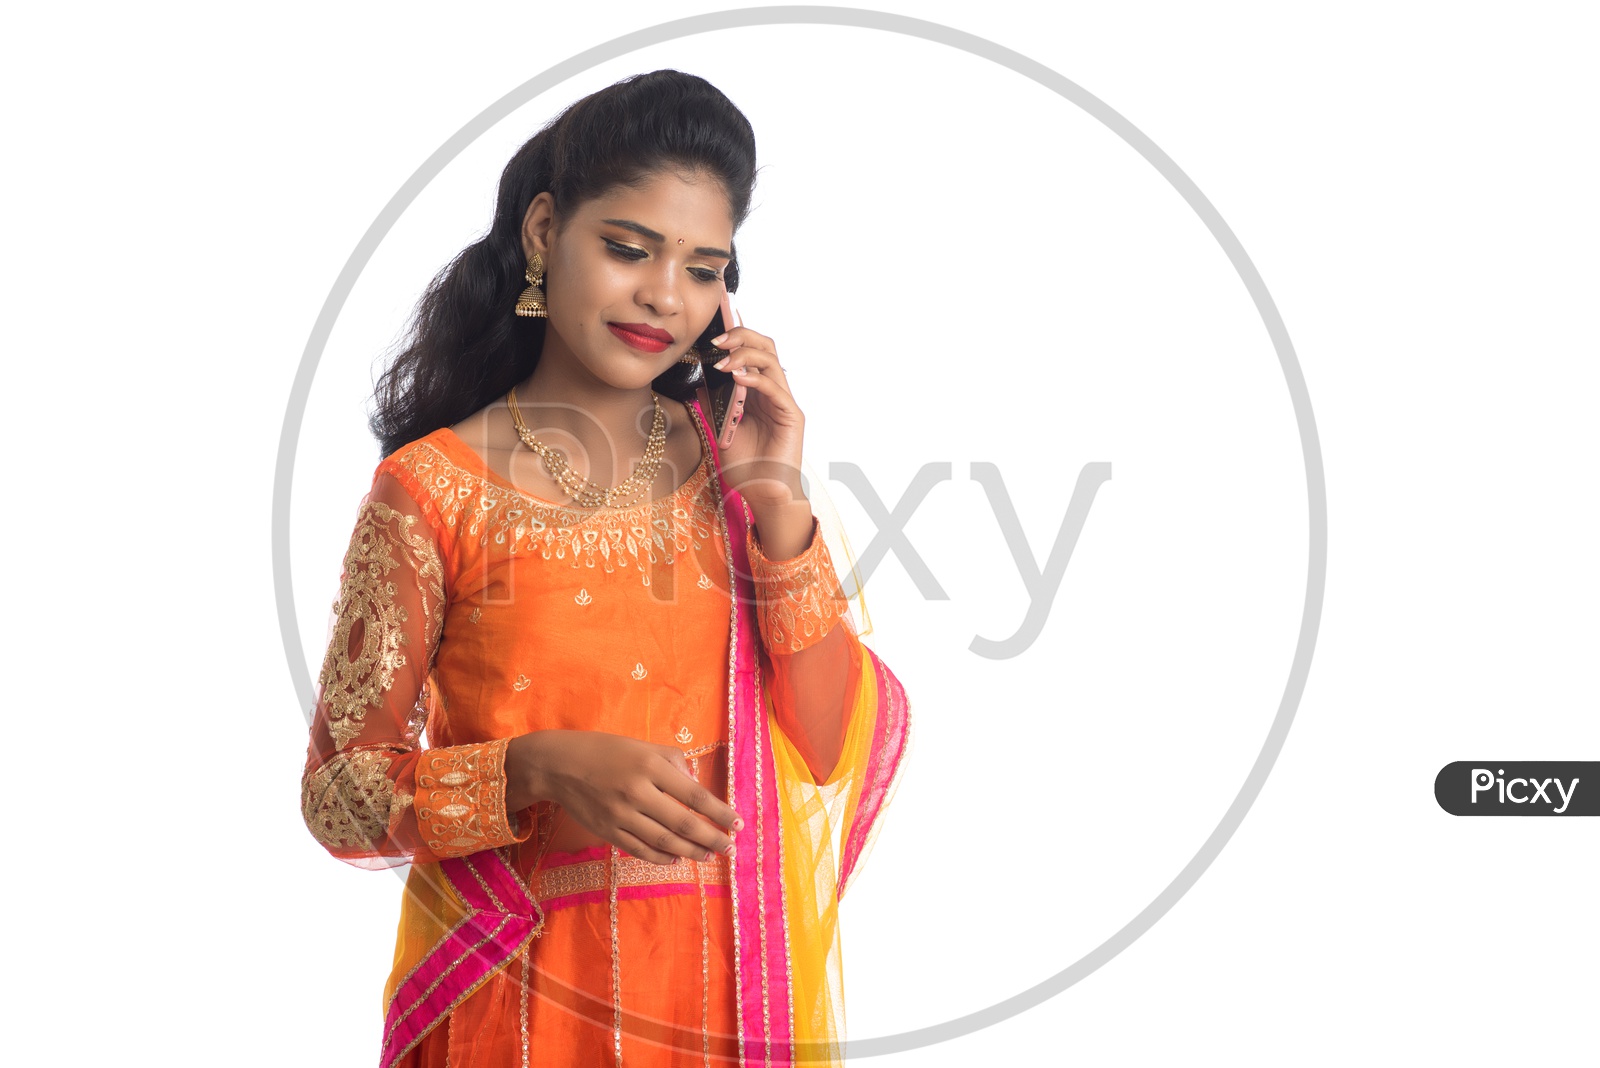 A Traditional Young Indian Woman Talking In Smart Phone And Posing On an Isolated White Background